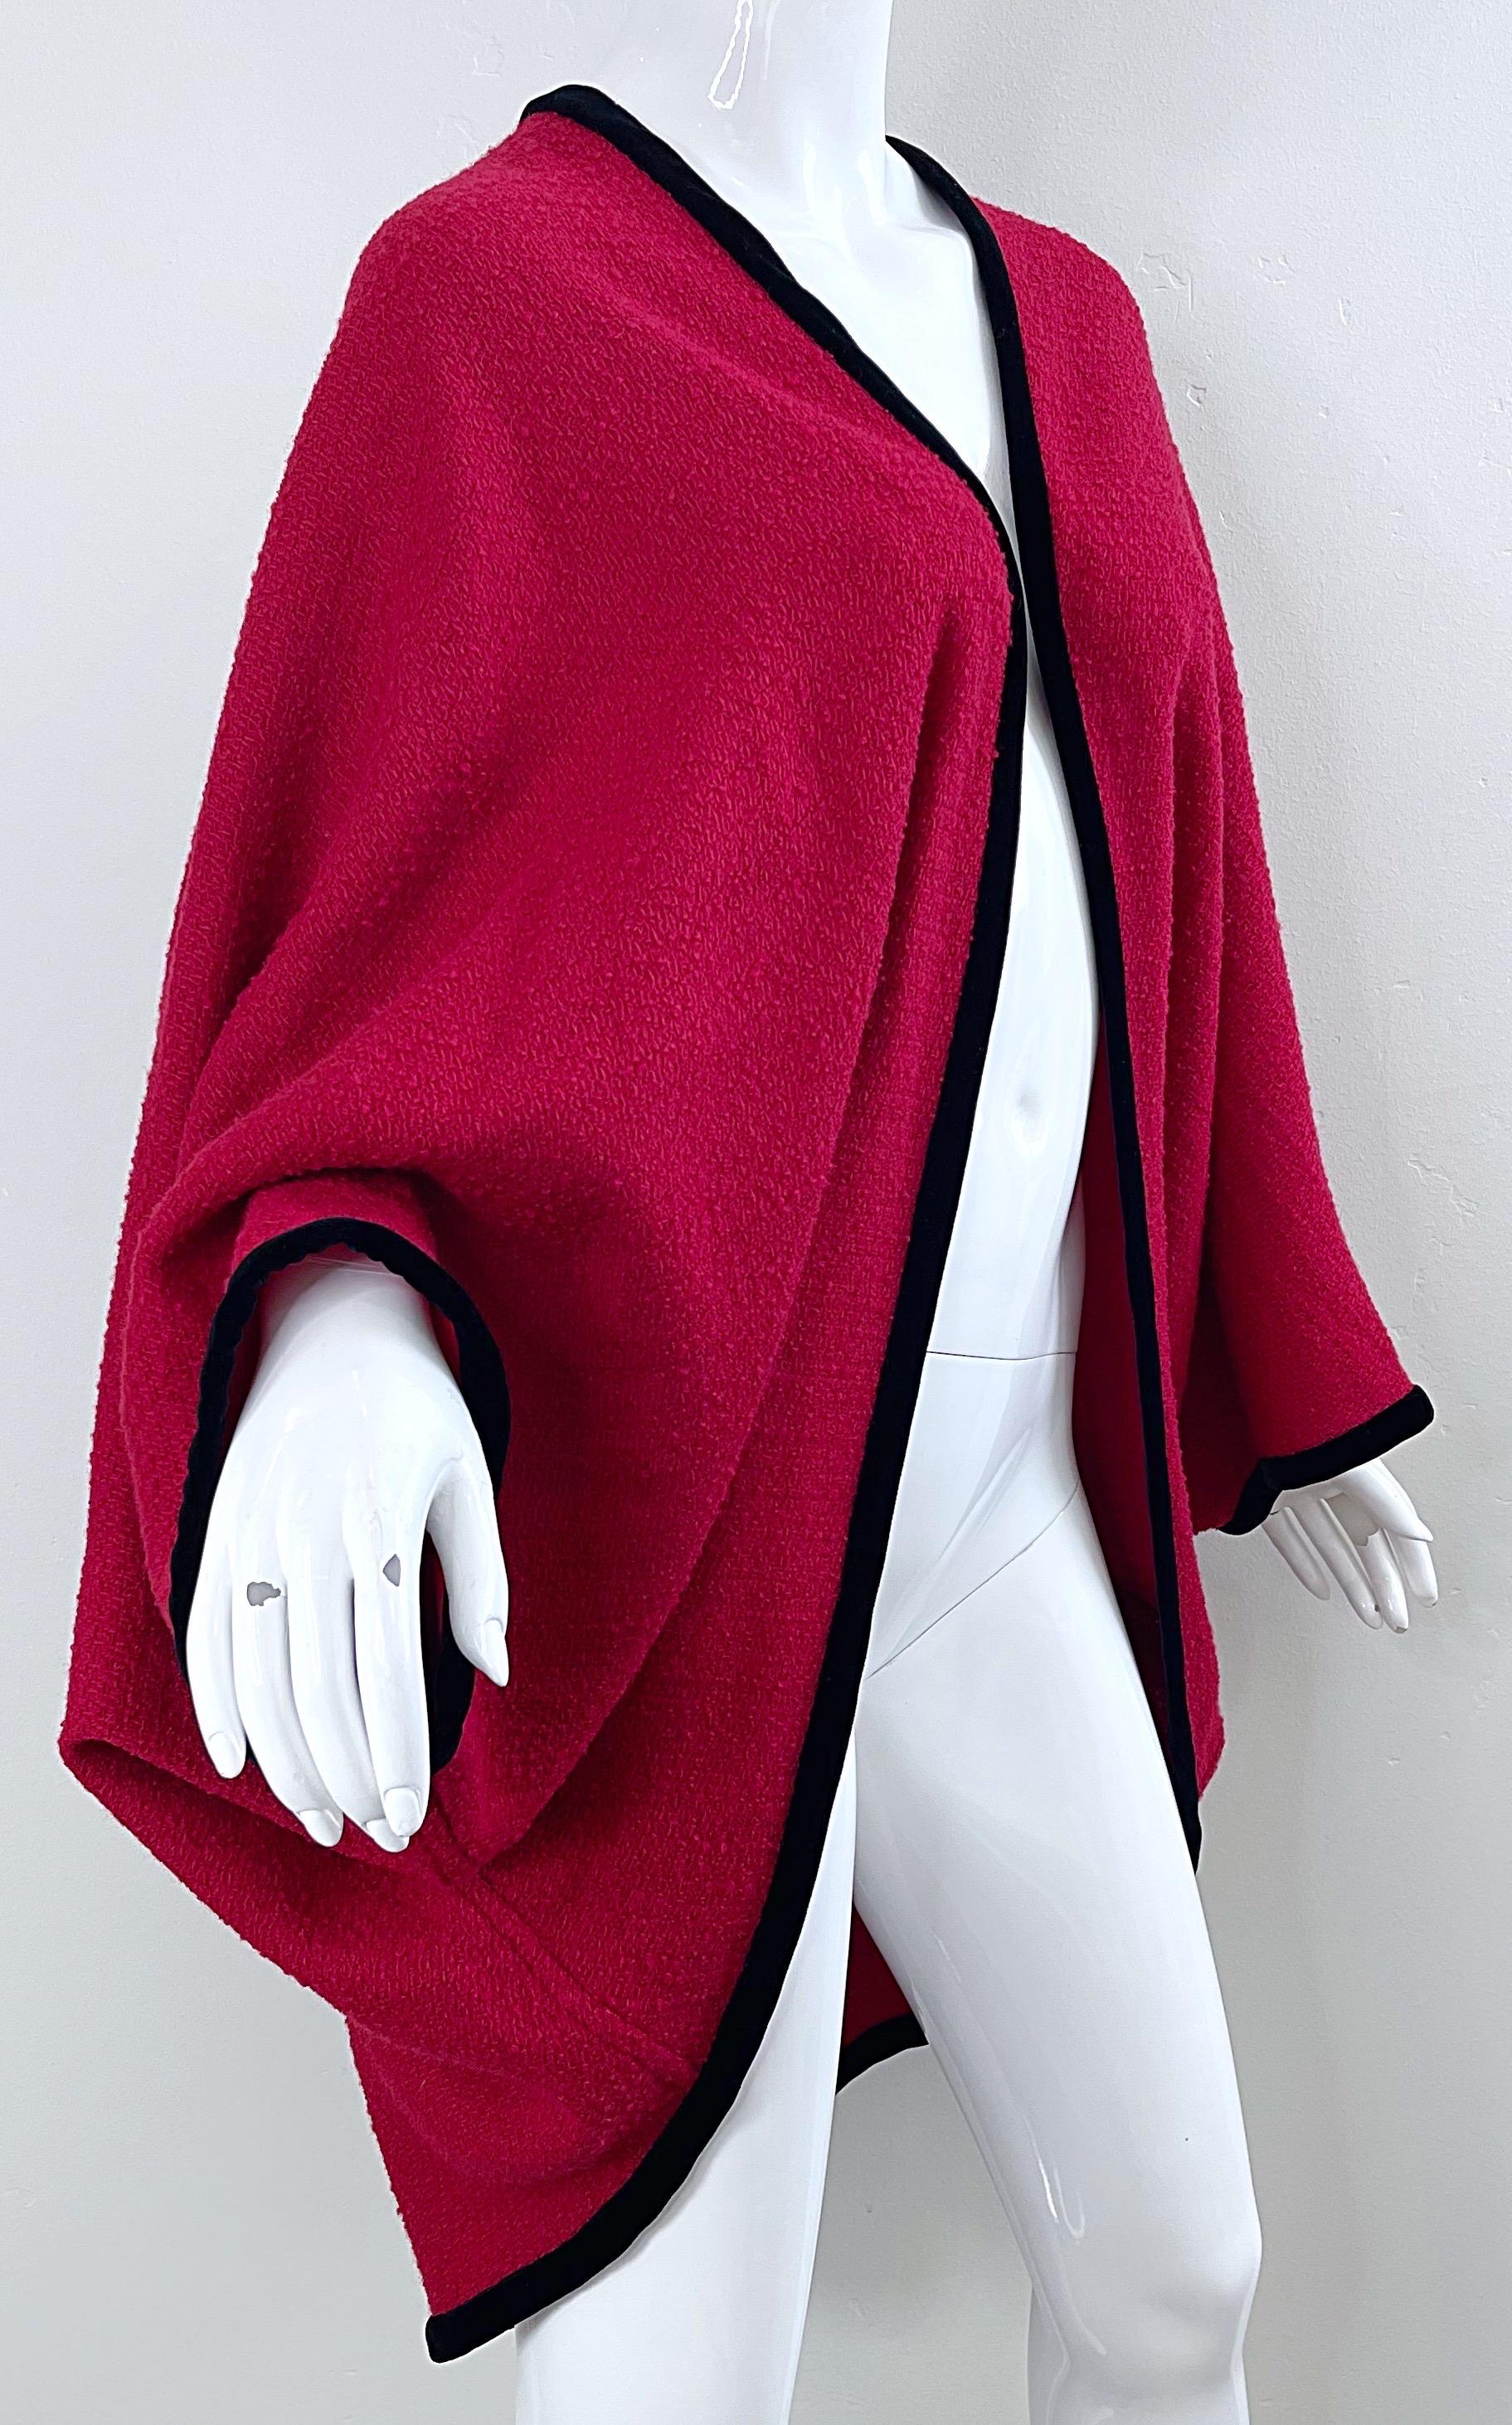 Karl Lagerfeld 1980s Lipstick Red Boiled Wool Cocoon Vintage Cape Kimono Jacket For Sale 2